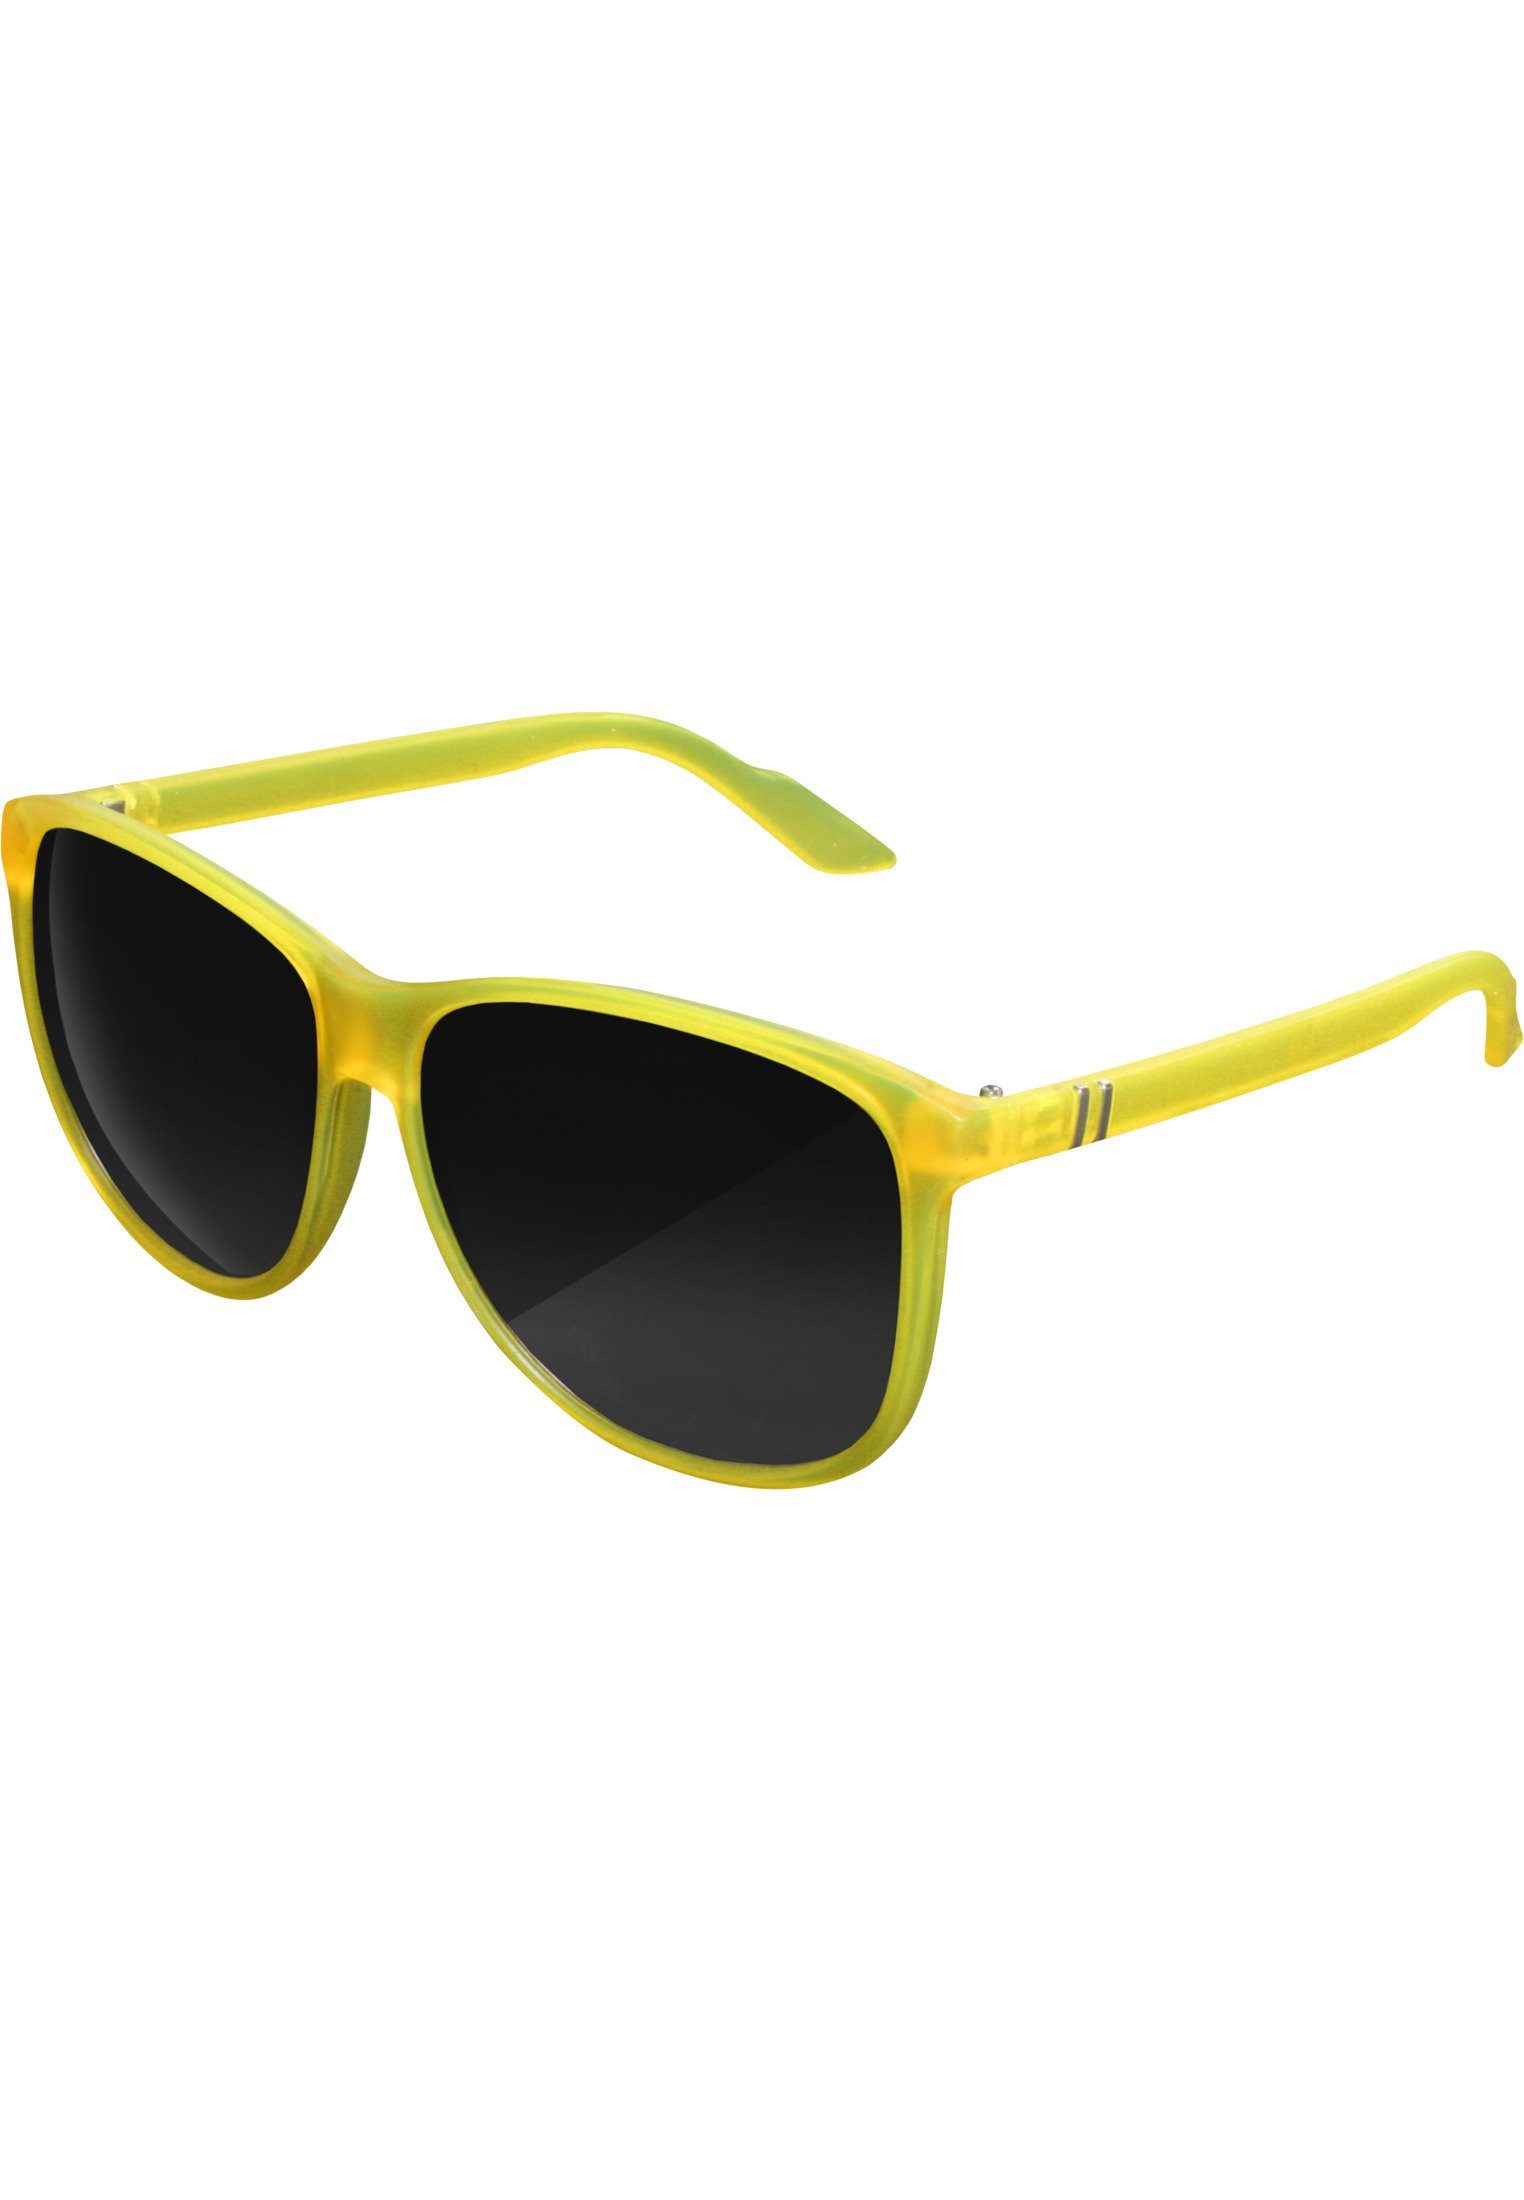 MSTRDS Sonnenbrille Accessoires Sunglasses Chirwa neonyellow